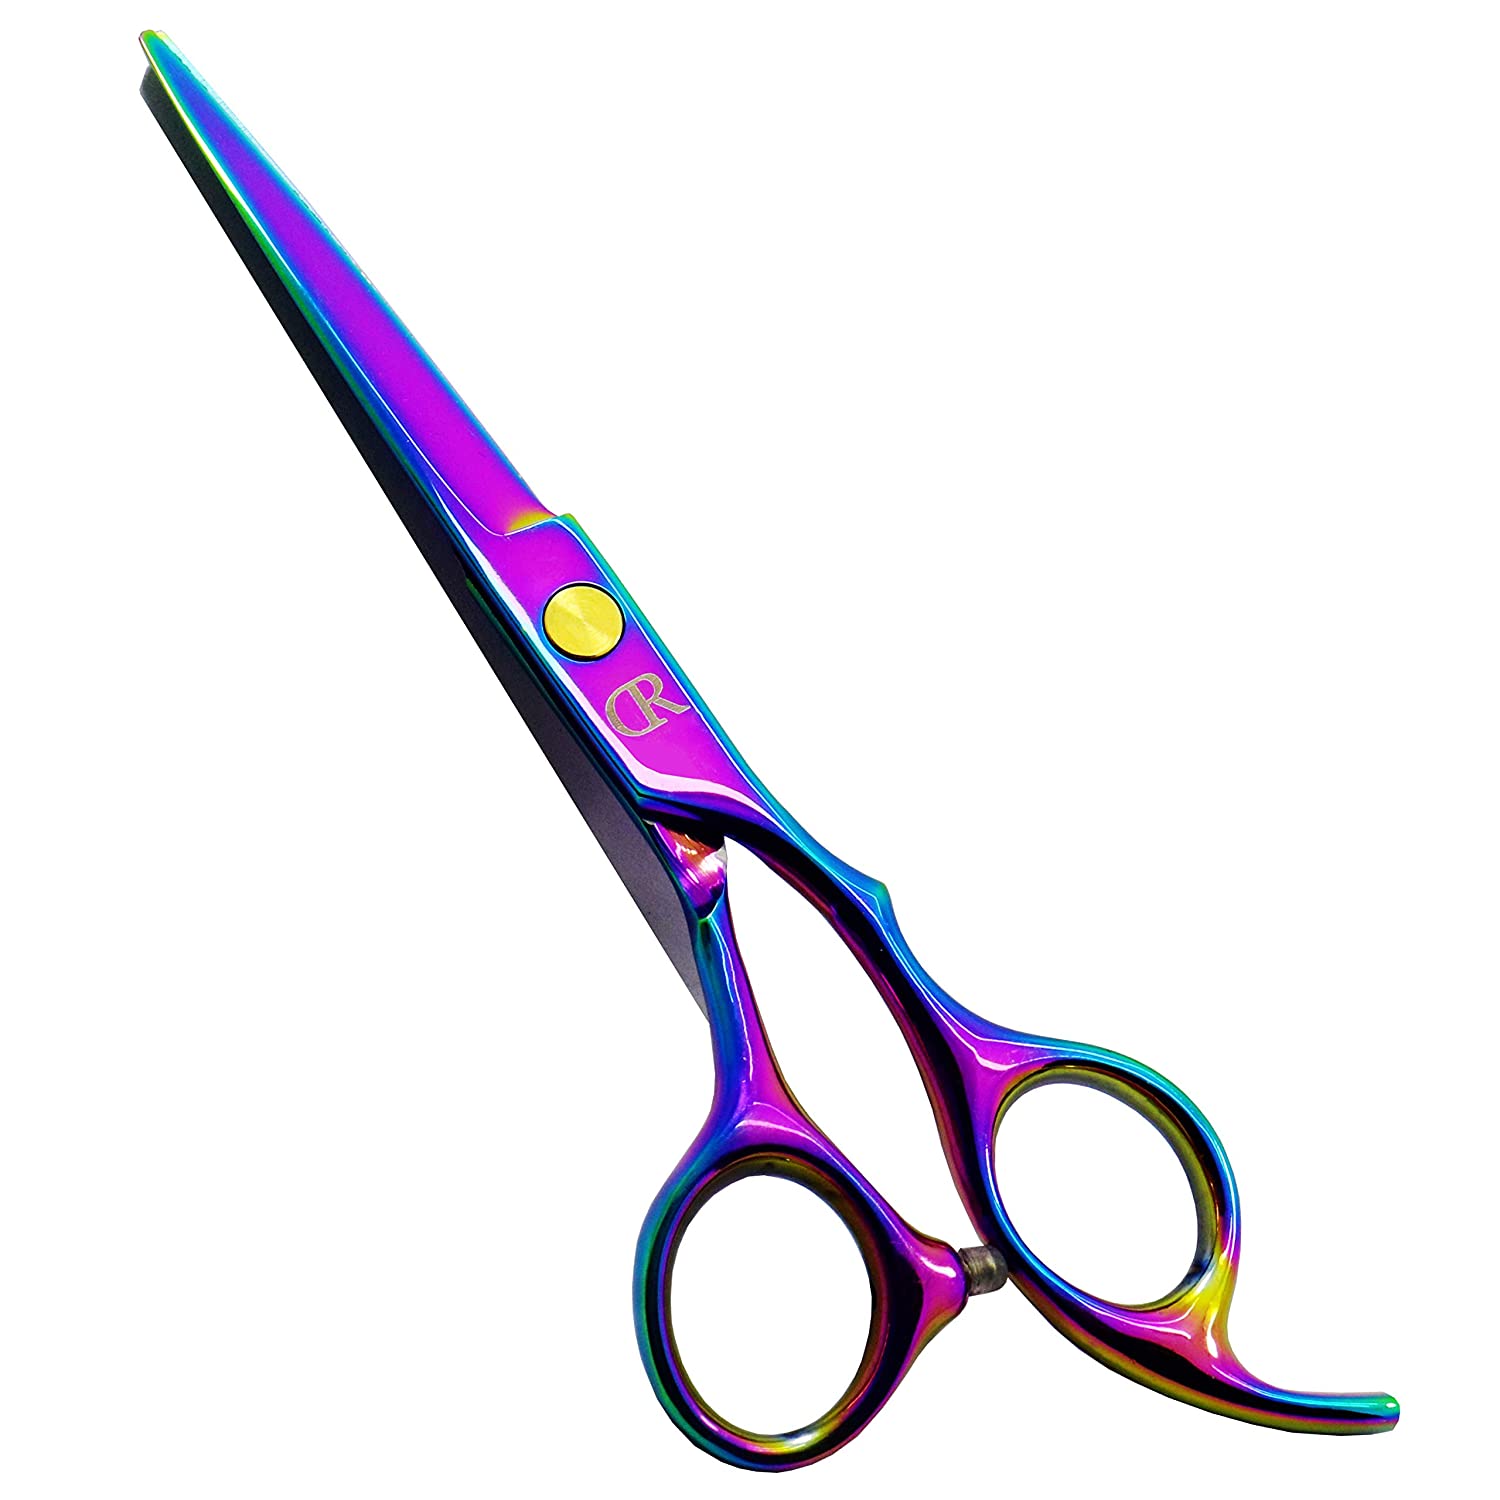 Professional Hair Cutting Shears/Scissors,6 Inch Stainless Steel Rainbow Color